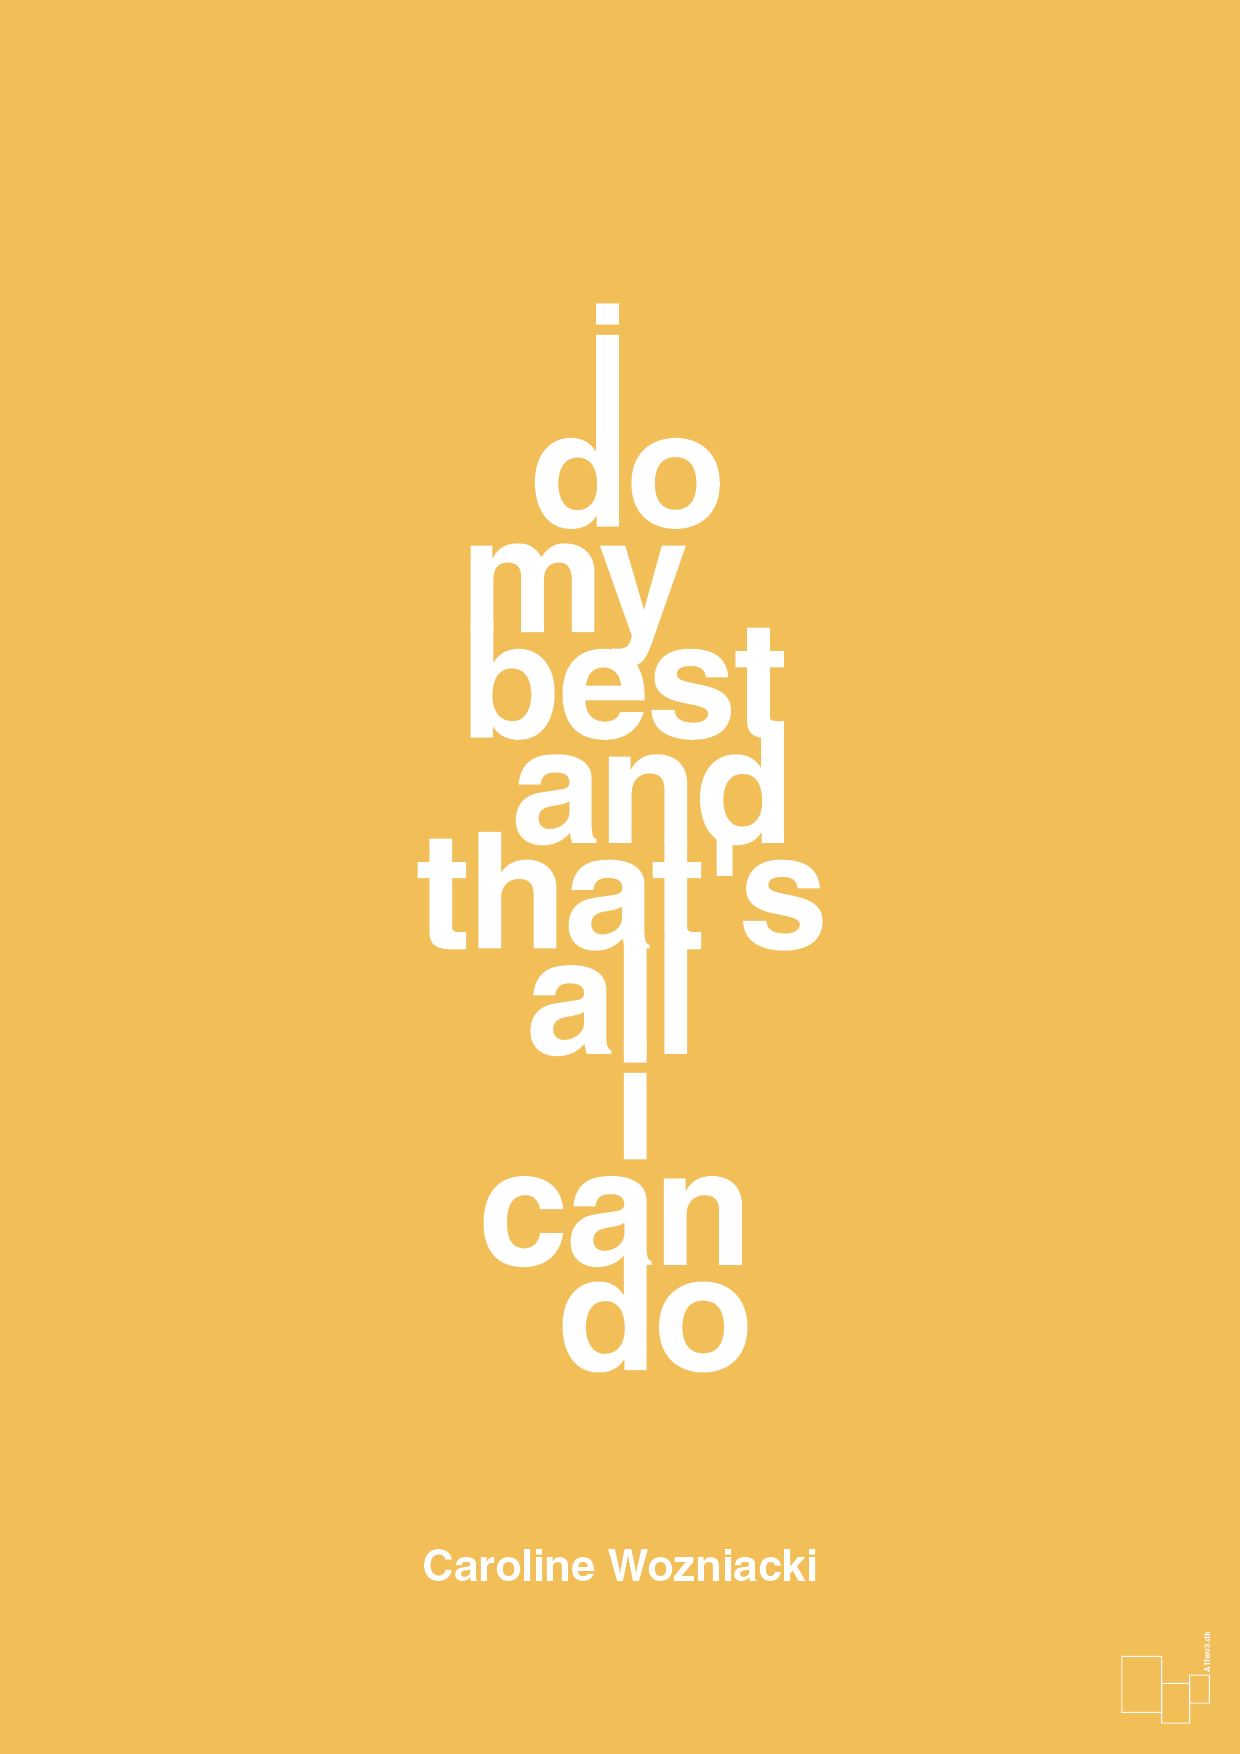 i do my best and that's all i can do - Plakat med Citater i Honeycomb